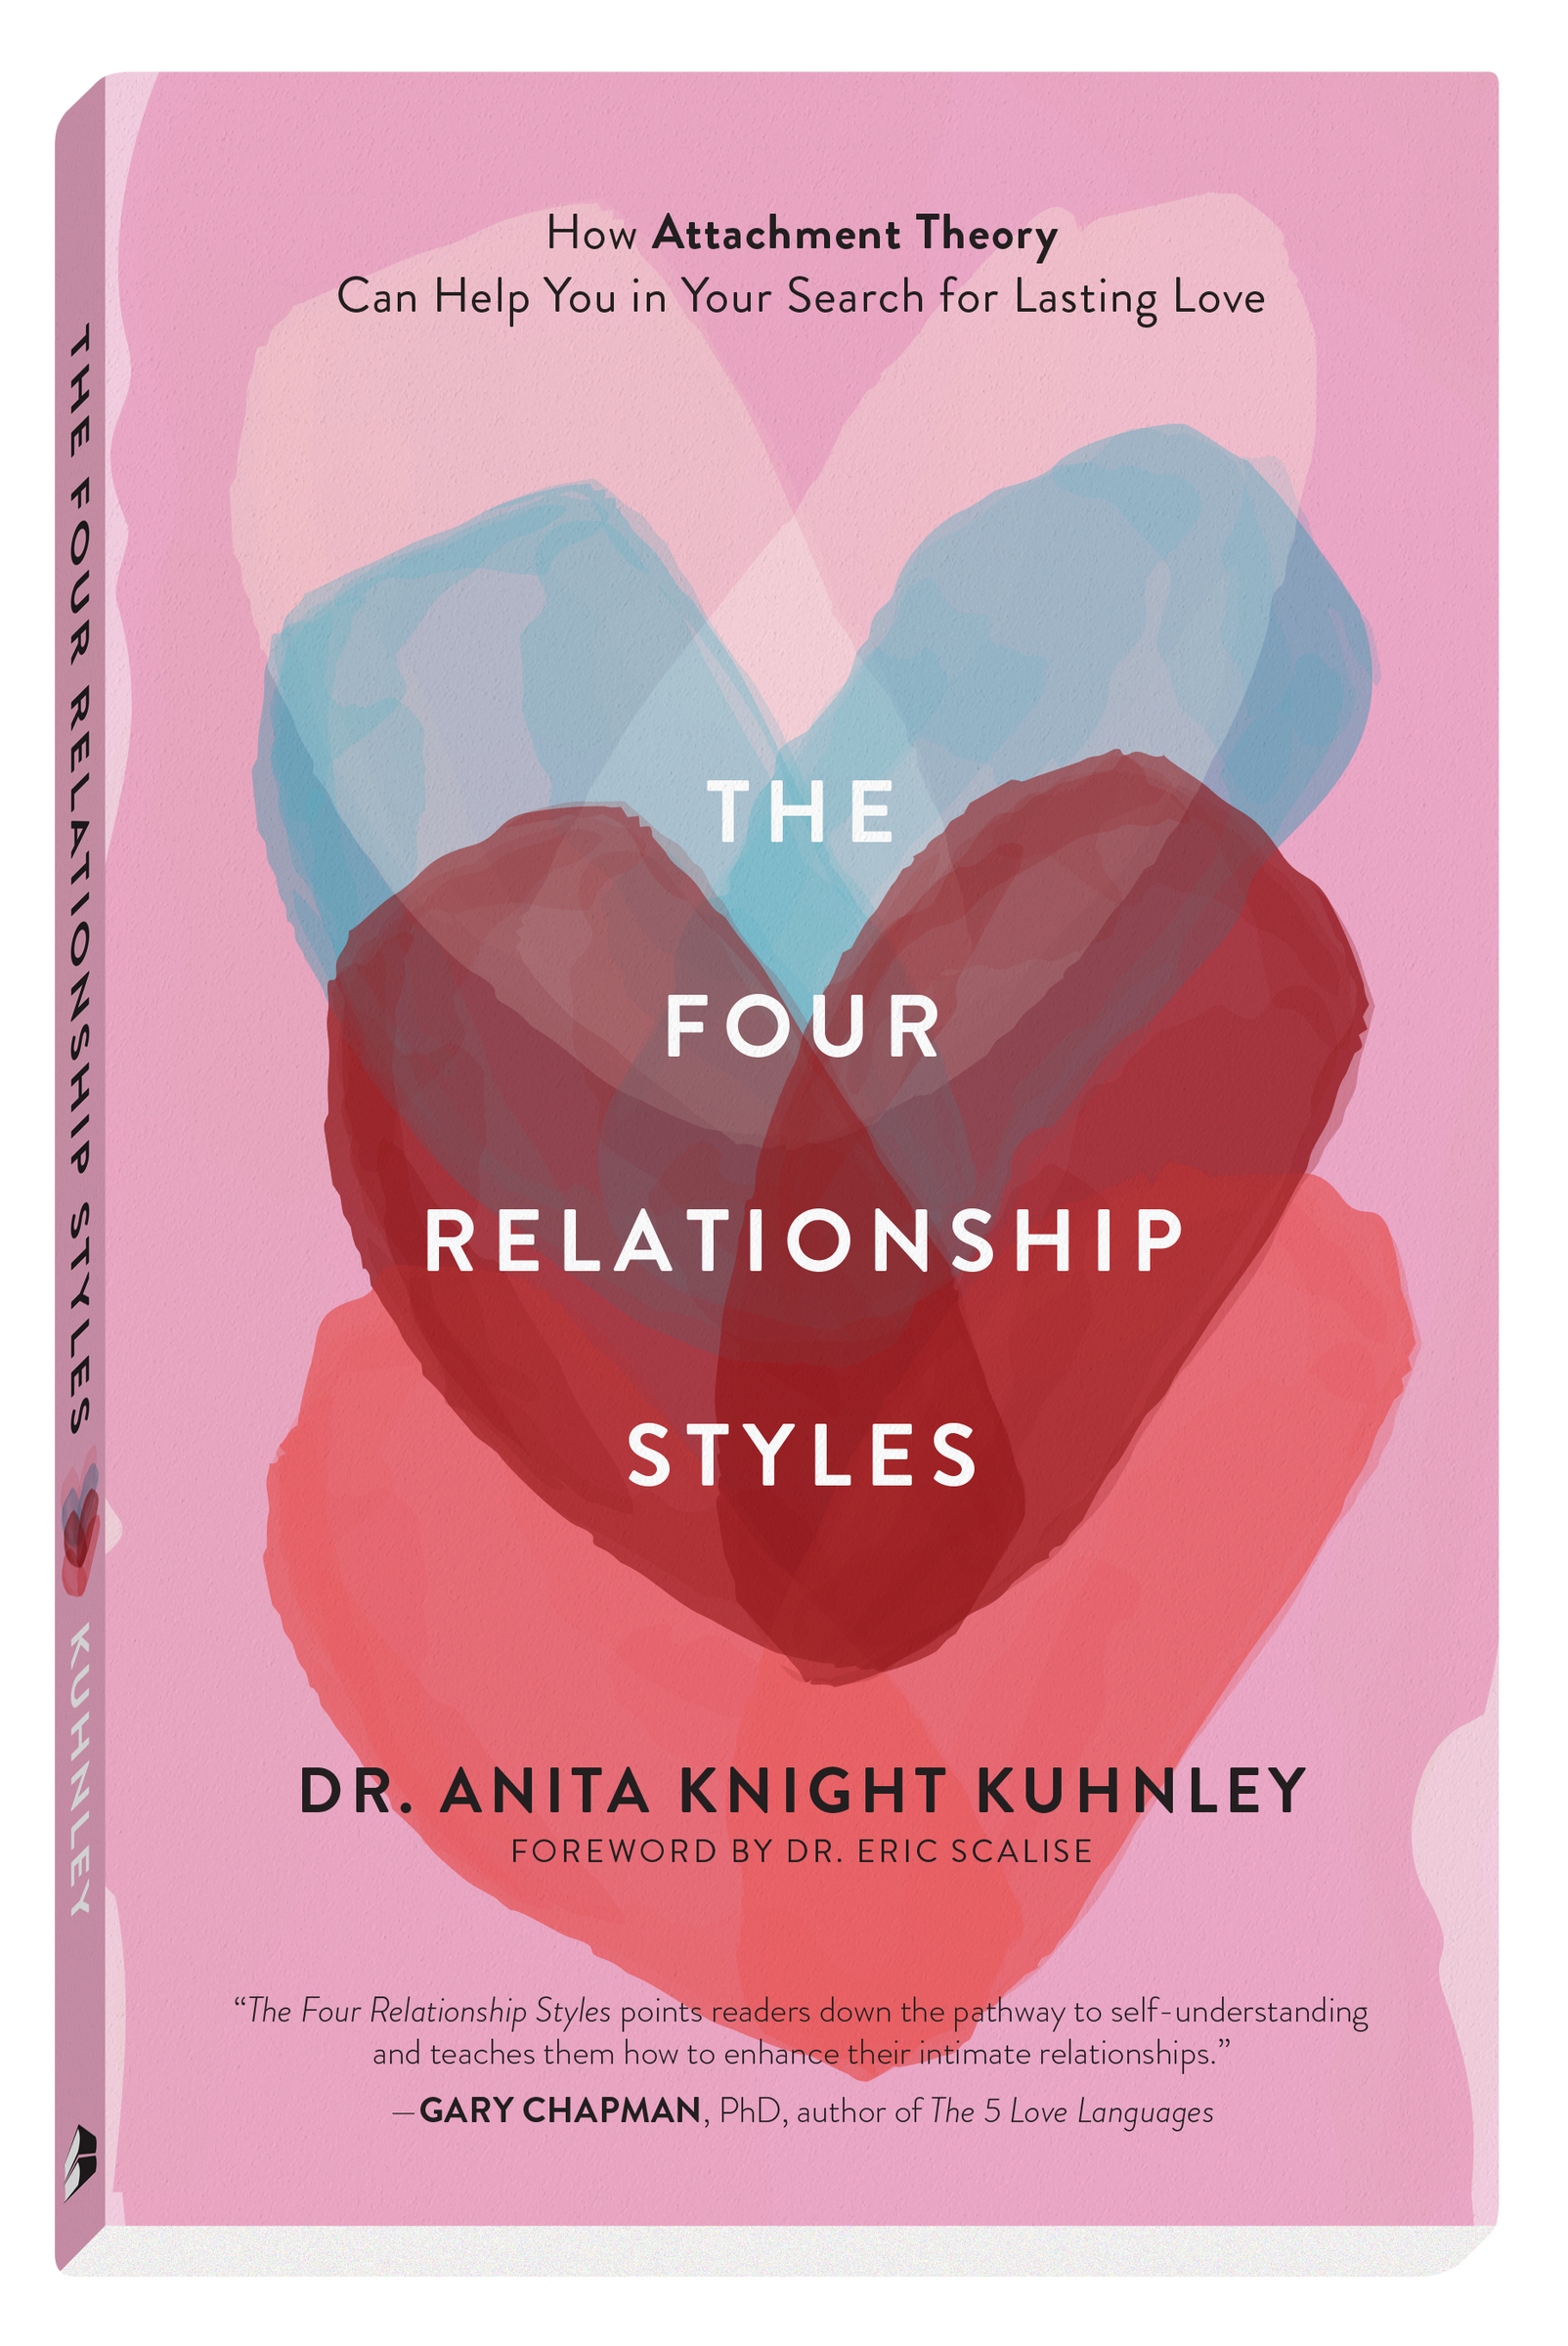 Pre-Order a Signed Copy of The Four Relationship Styles: How Attachment Theory Can Help You in Your Search for Lasting Love